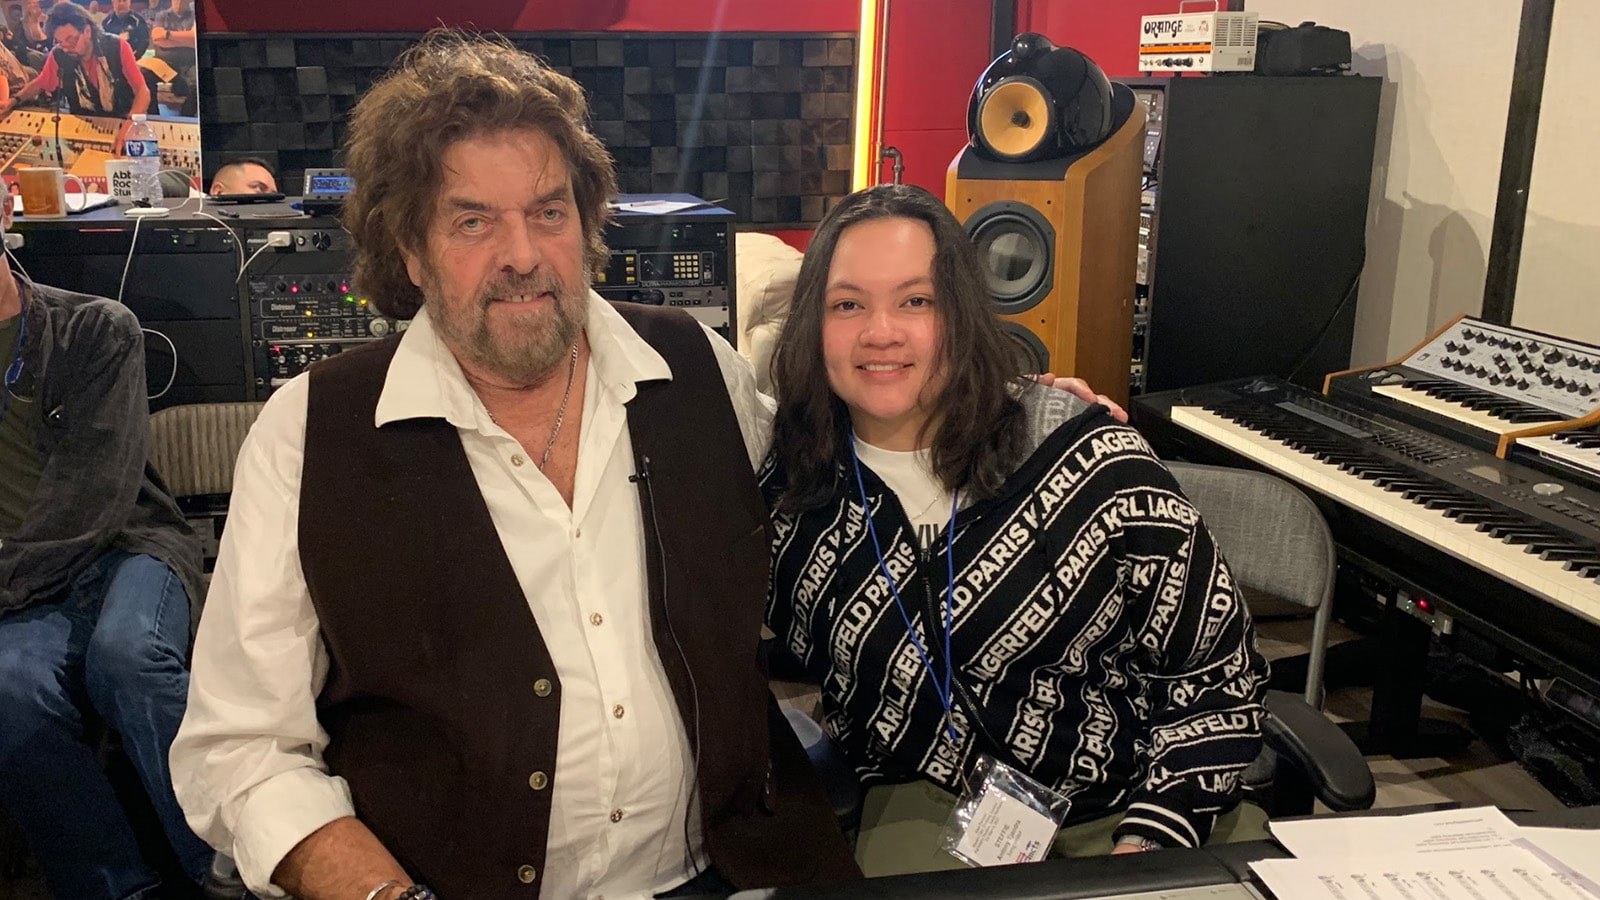 Alan Parsons sits with Steffie Tjandra in front of a mixing board in a recording studio. They are smiling at the camera.